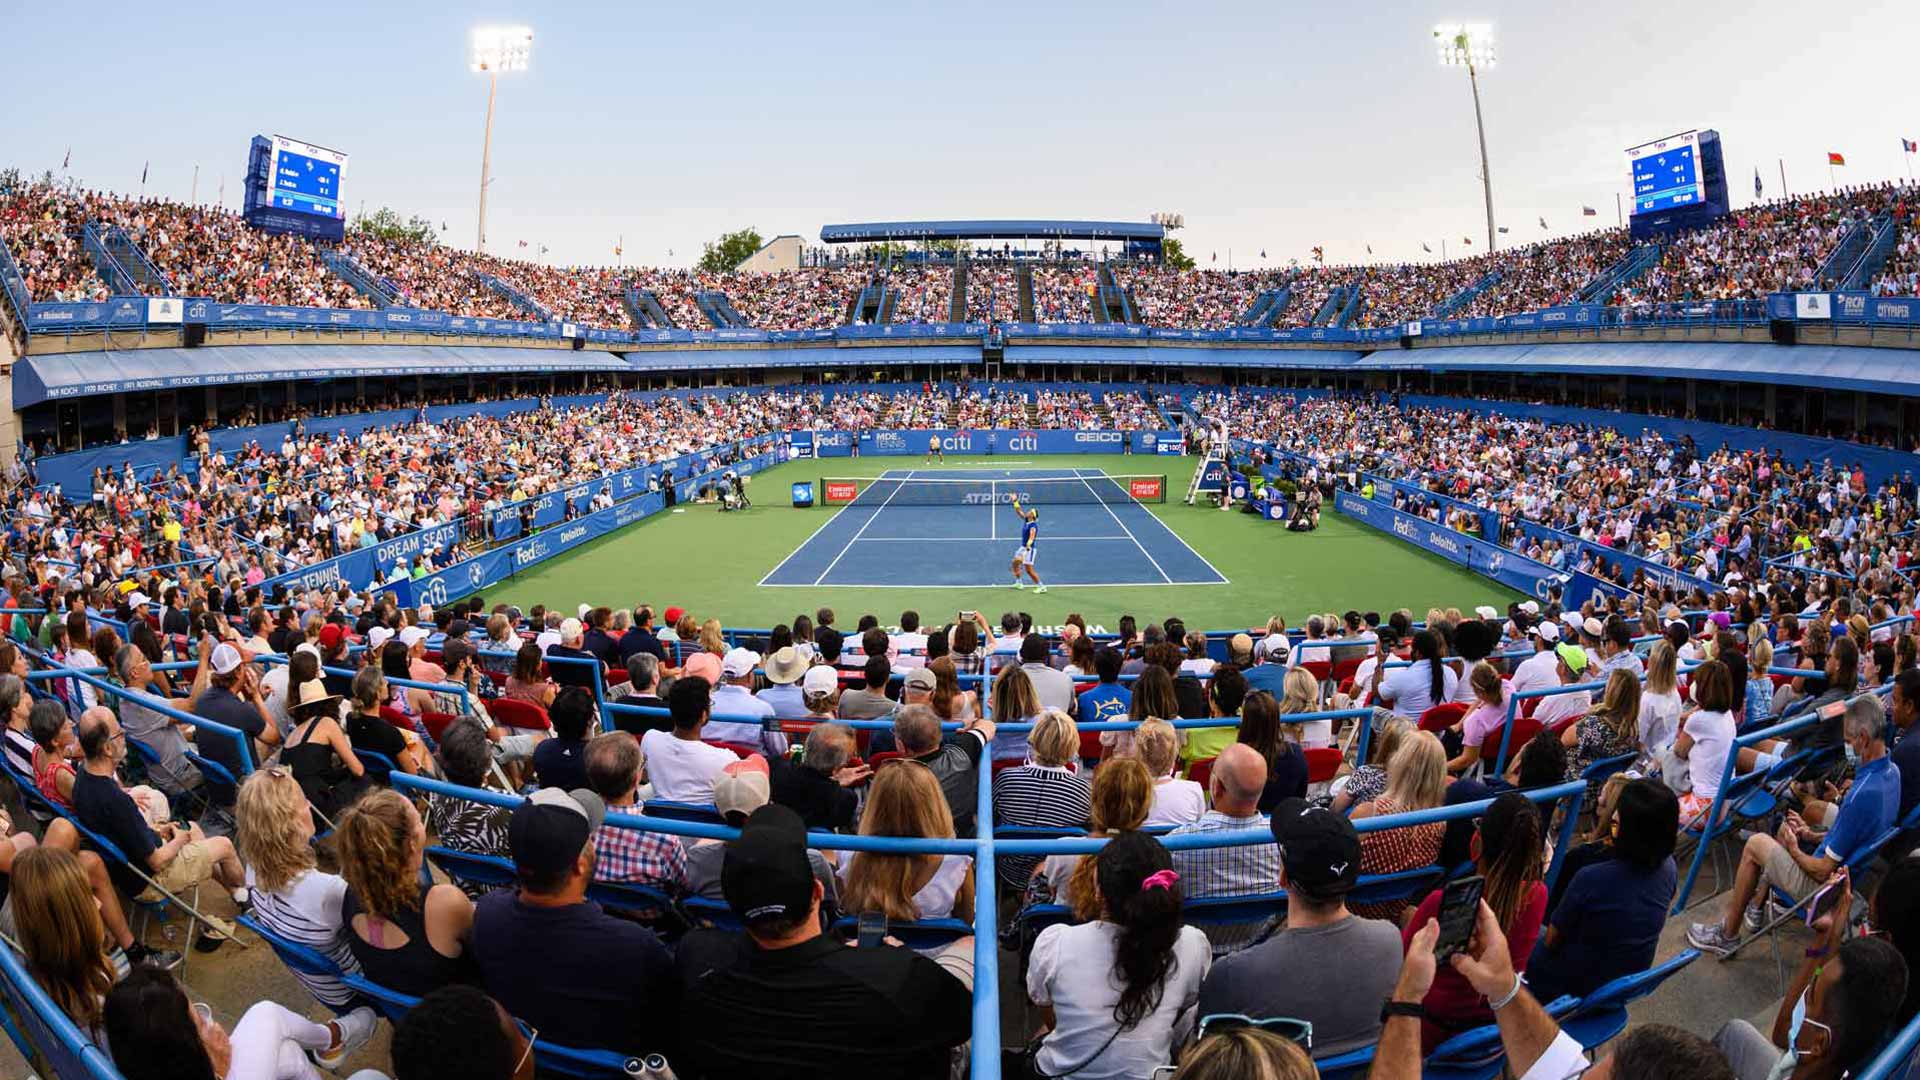 The ATP 500 event in Washington, D.C. runs from 31 July-6 August.